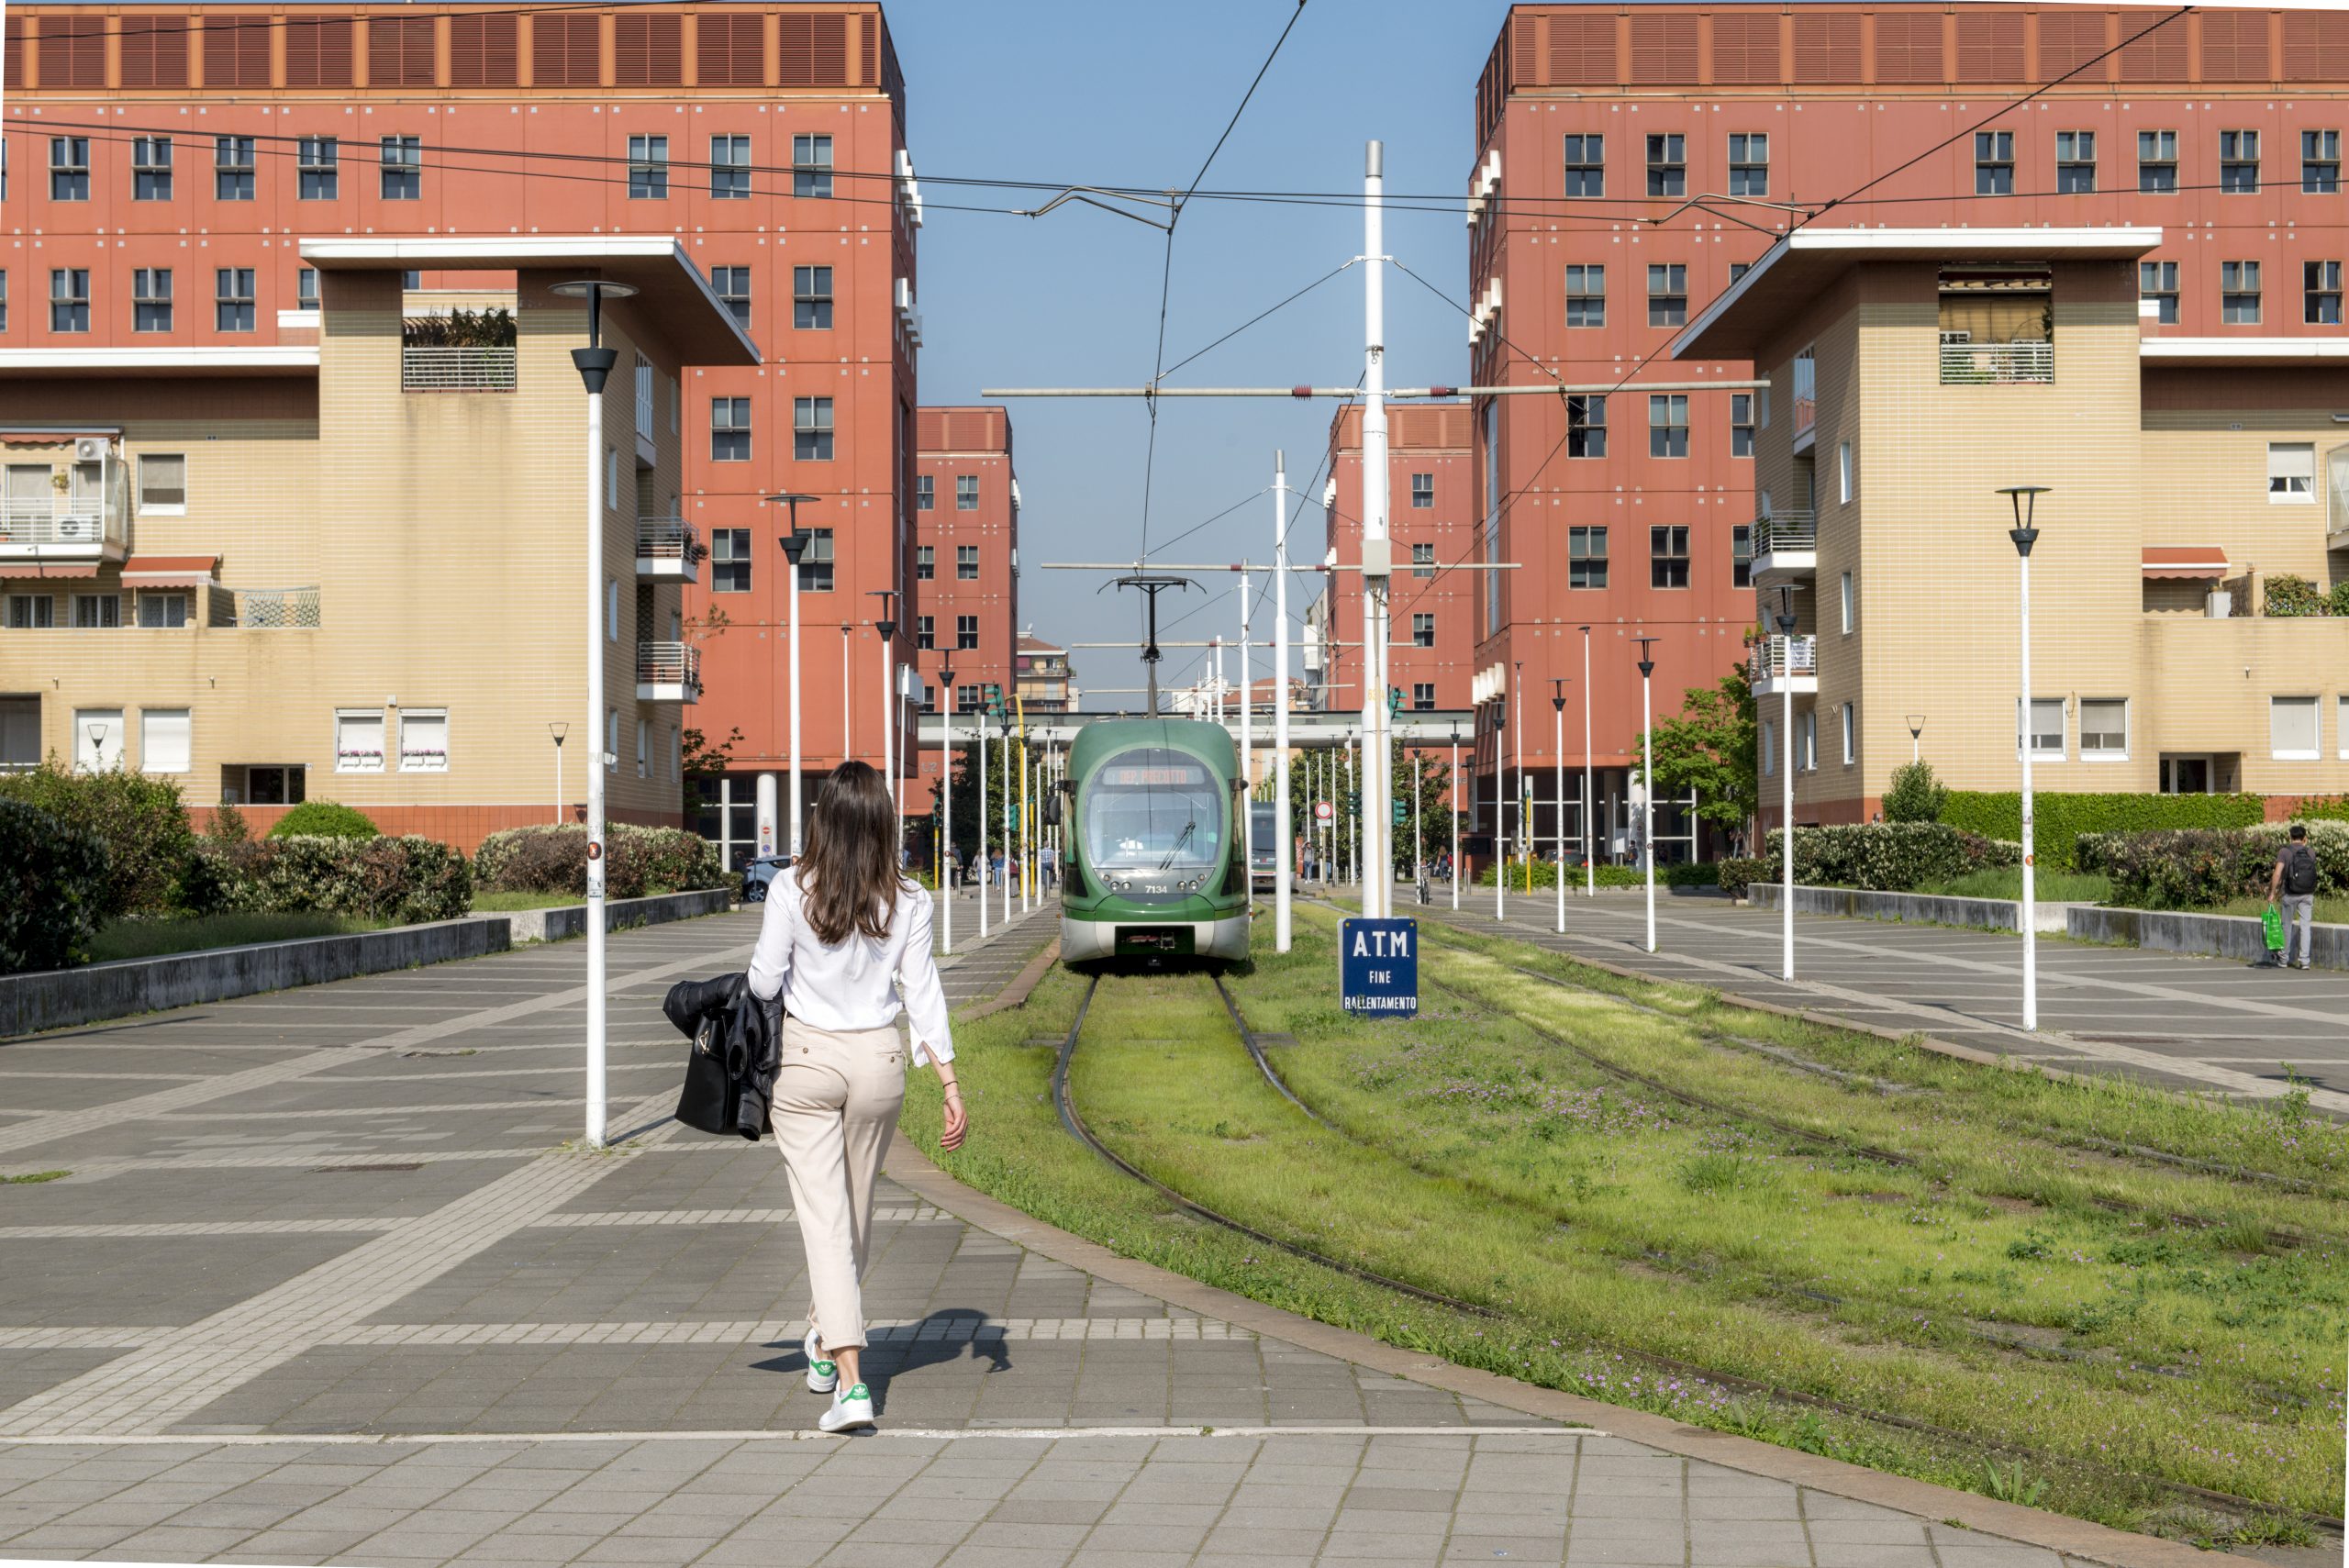 Campus of Bicocca with the tram line